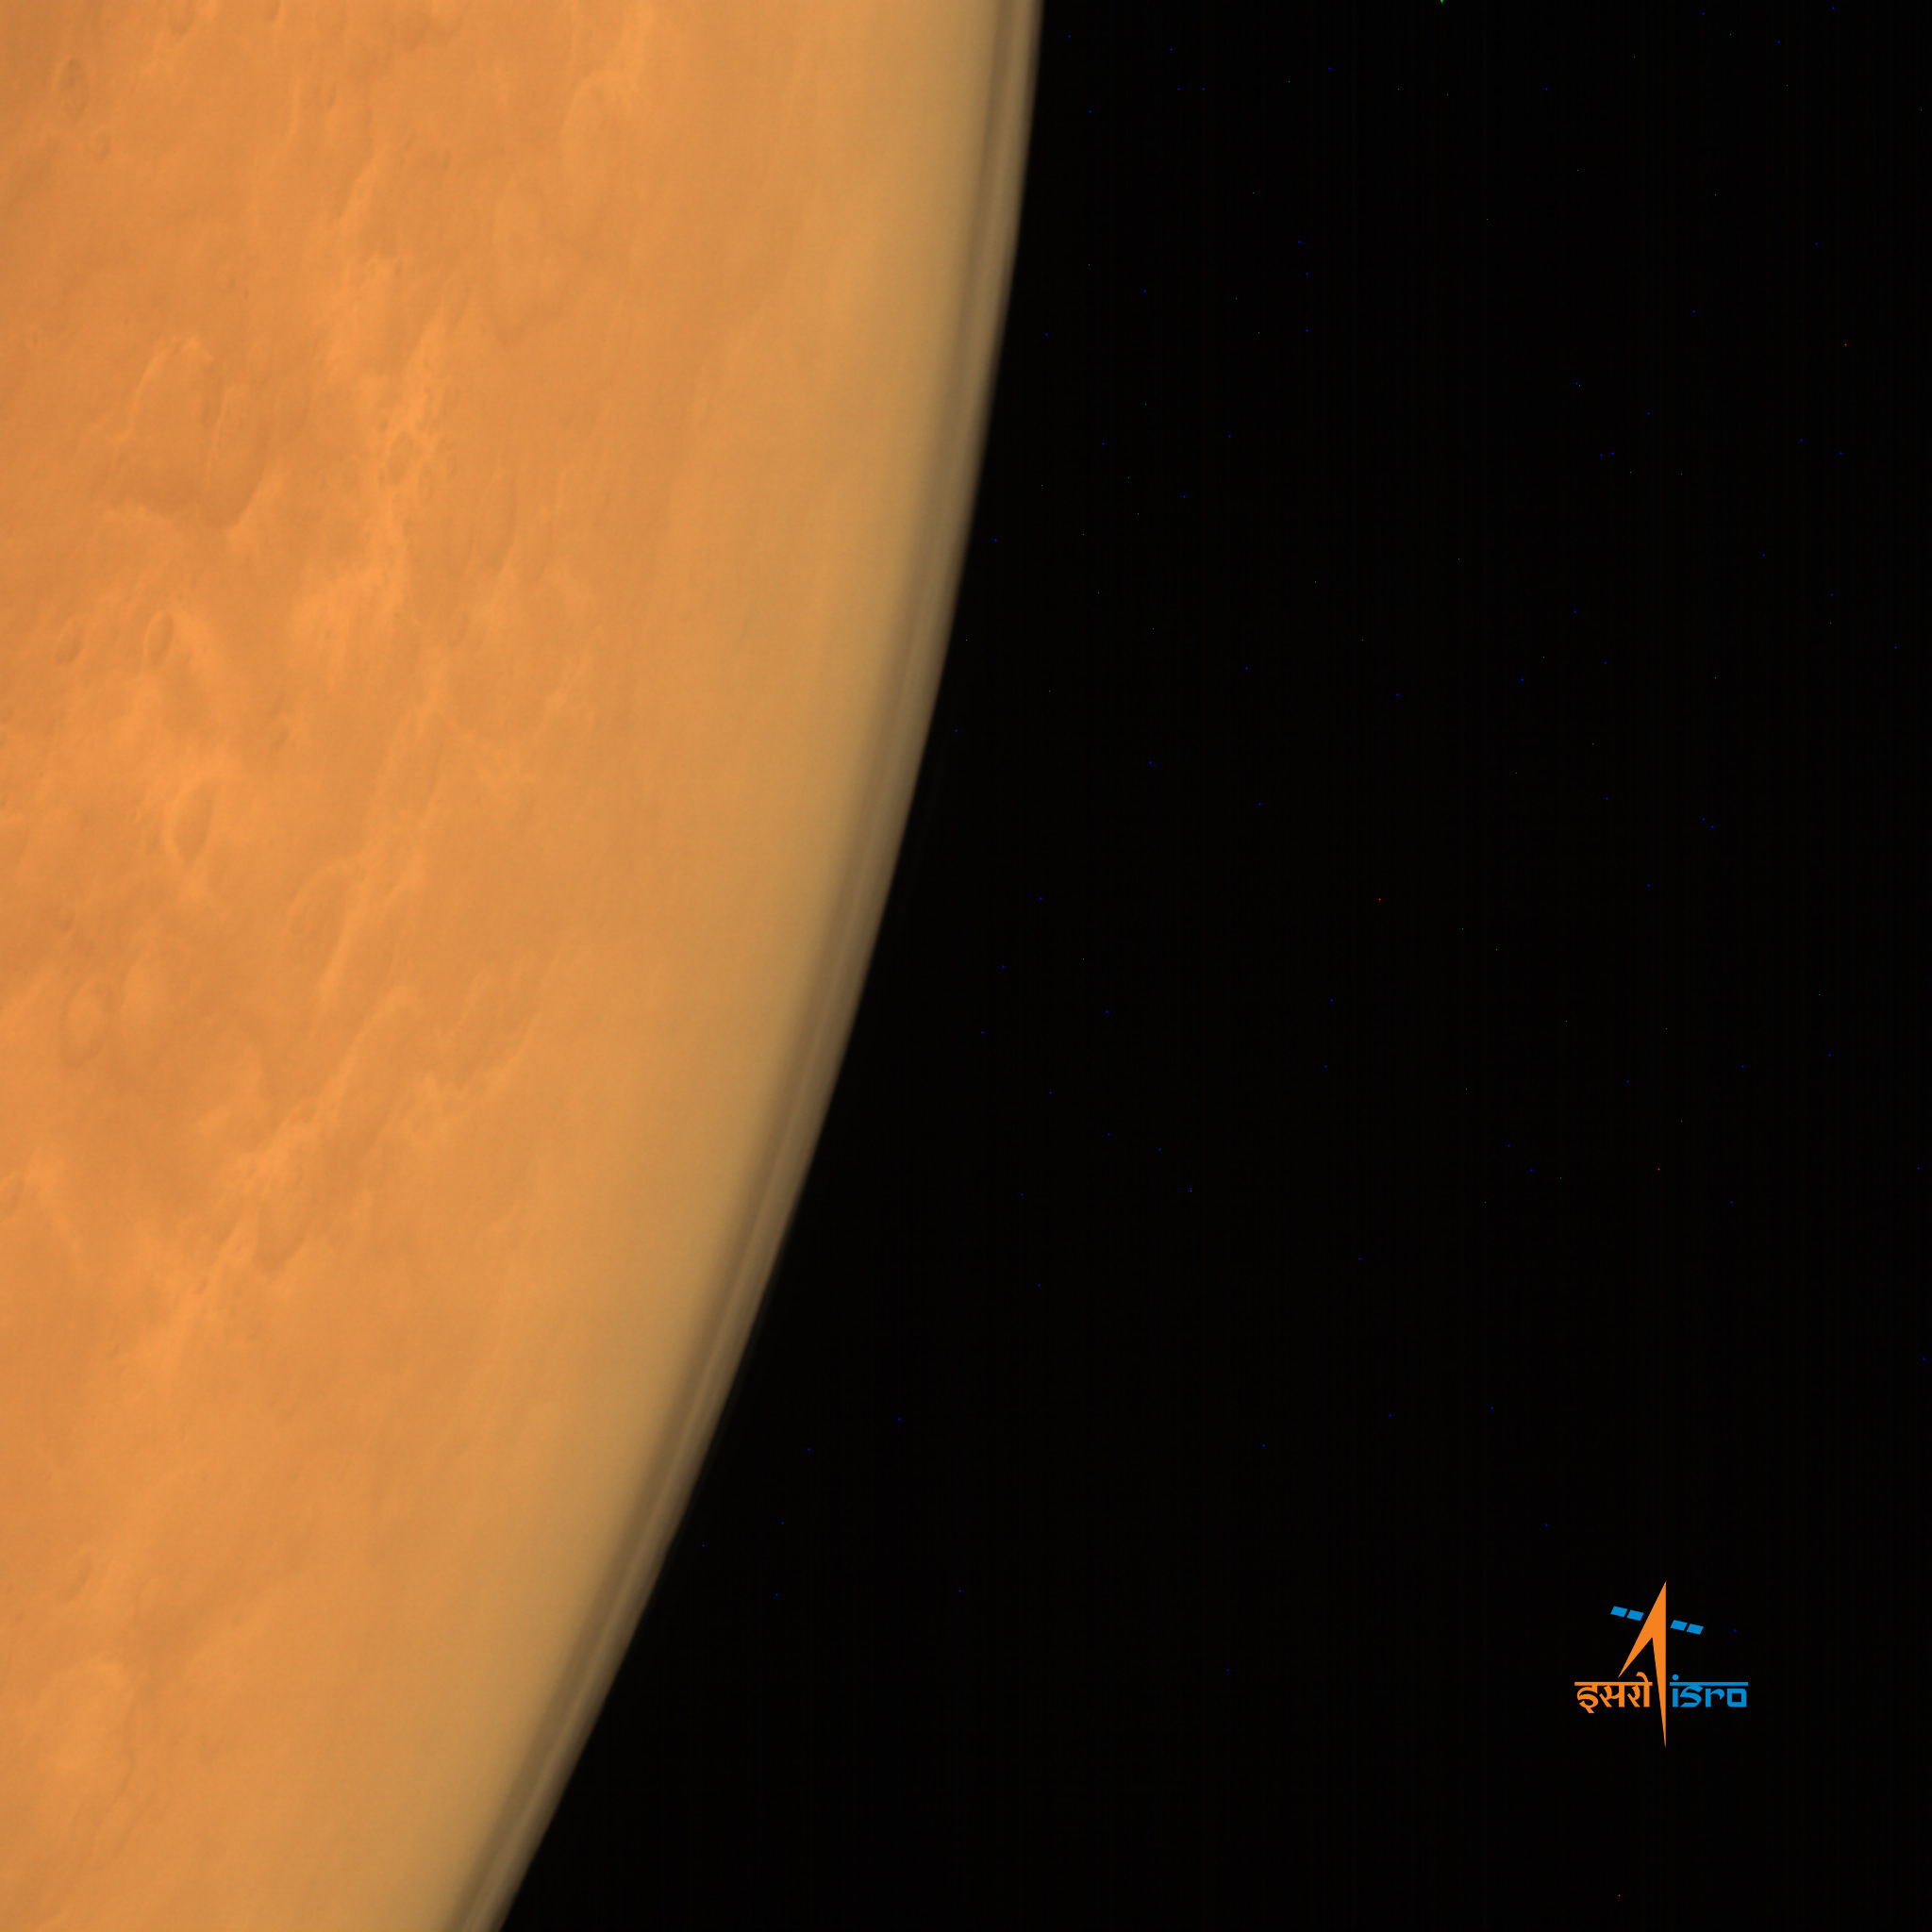 ISRO's Mars Orbiter Mission captures the limb of Mars with the Mars Color Camera from an altitude of 8449 km soon after achieving orbit on Sept. 23/24, 2014. . Credit: ISRO 